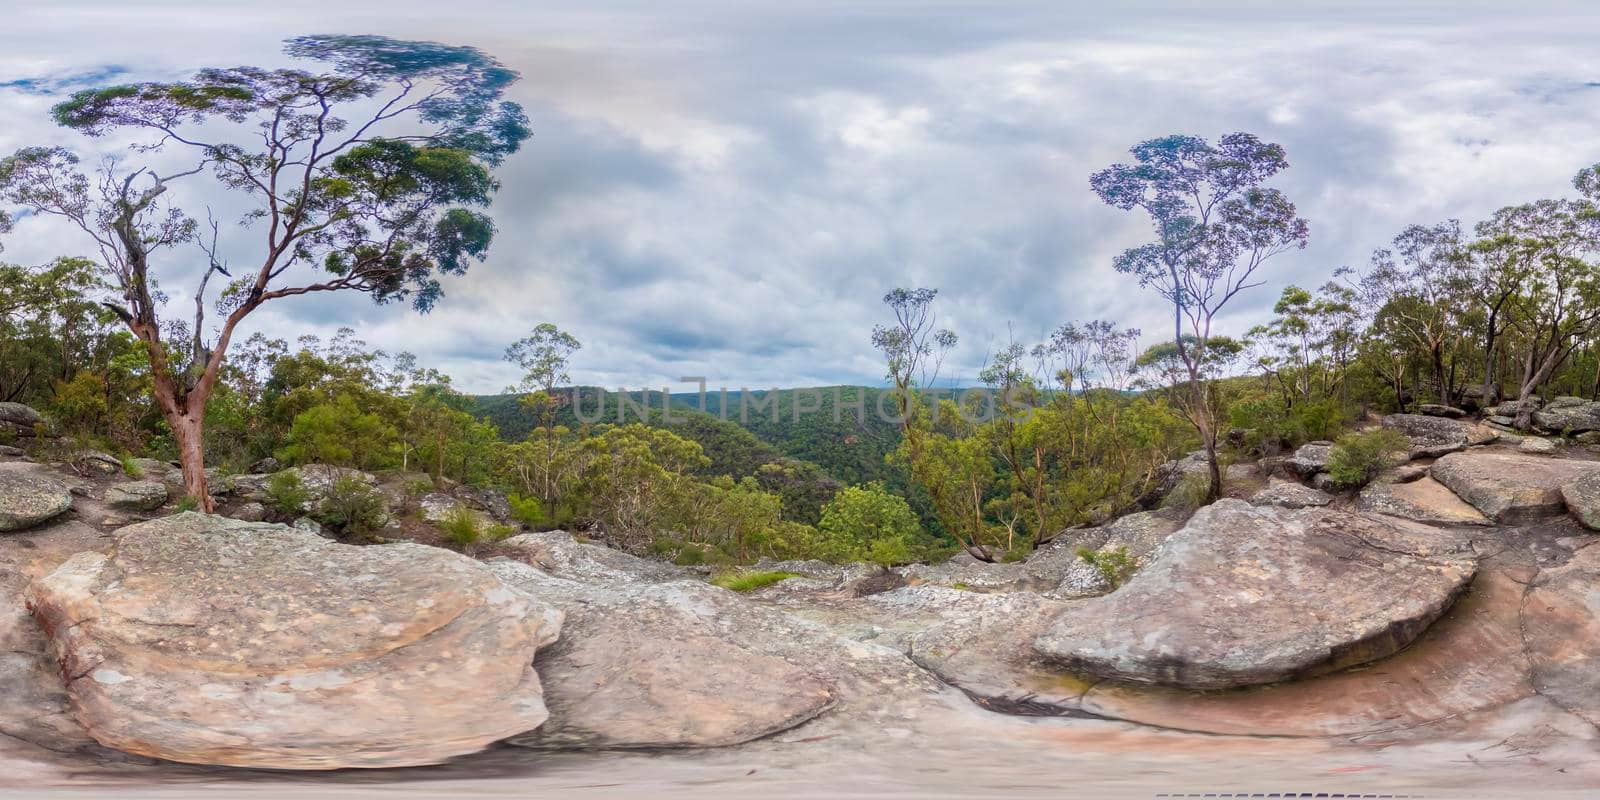 Spherical 360-degree panorama photograph from Martin’s Lookout in regional Australia by WittkePhotos